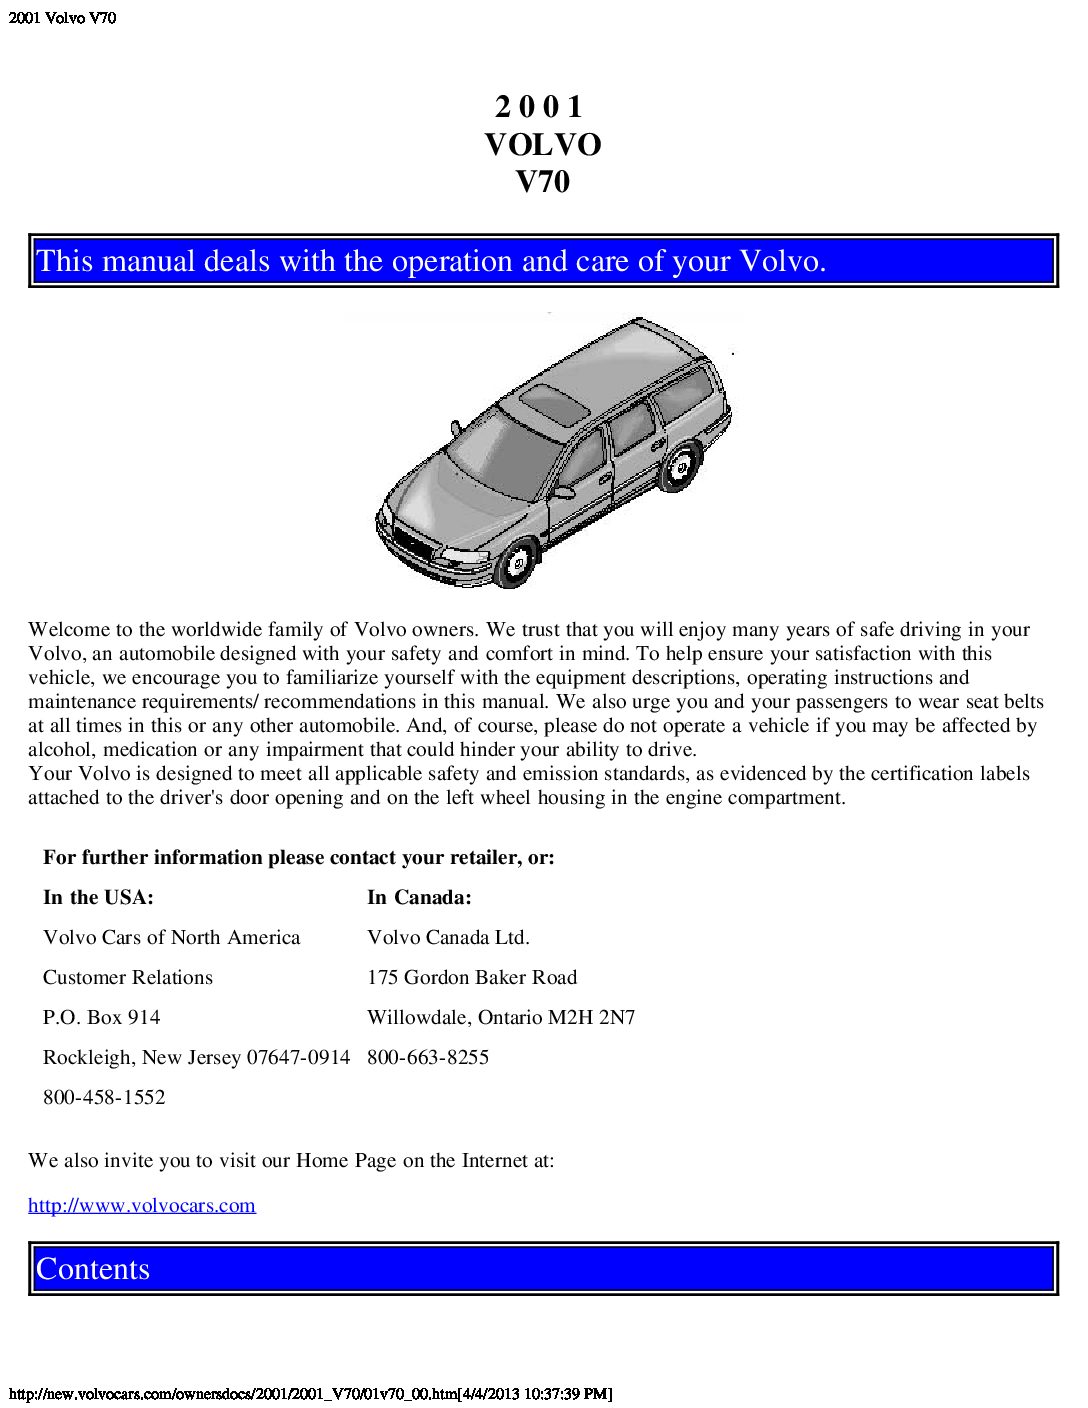 2001 volvo v70 owners manual download